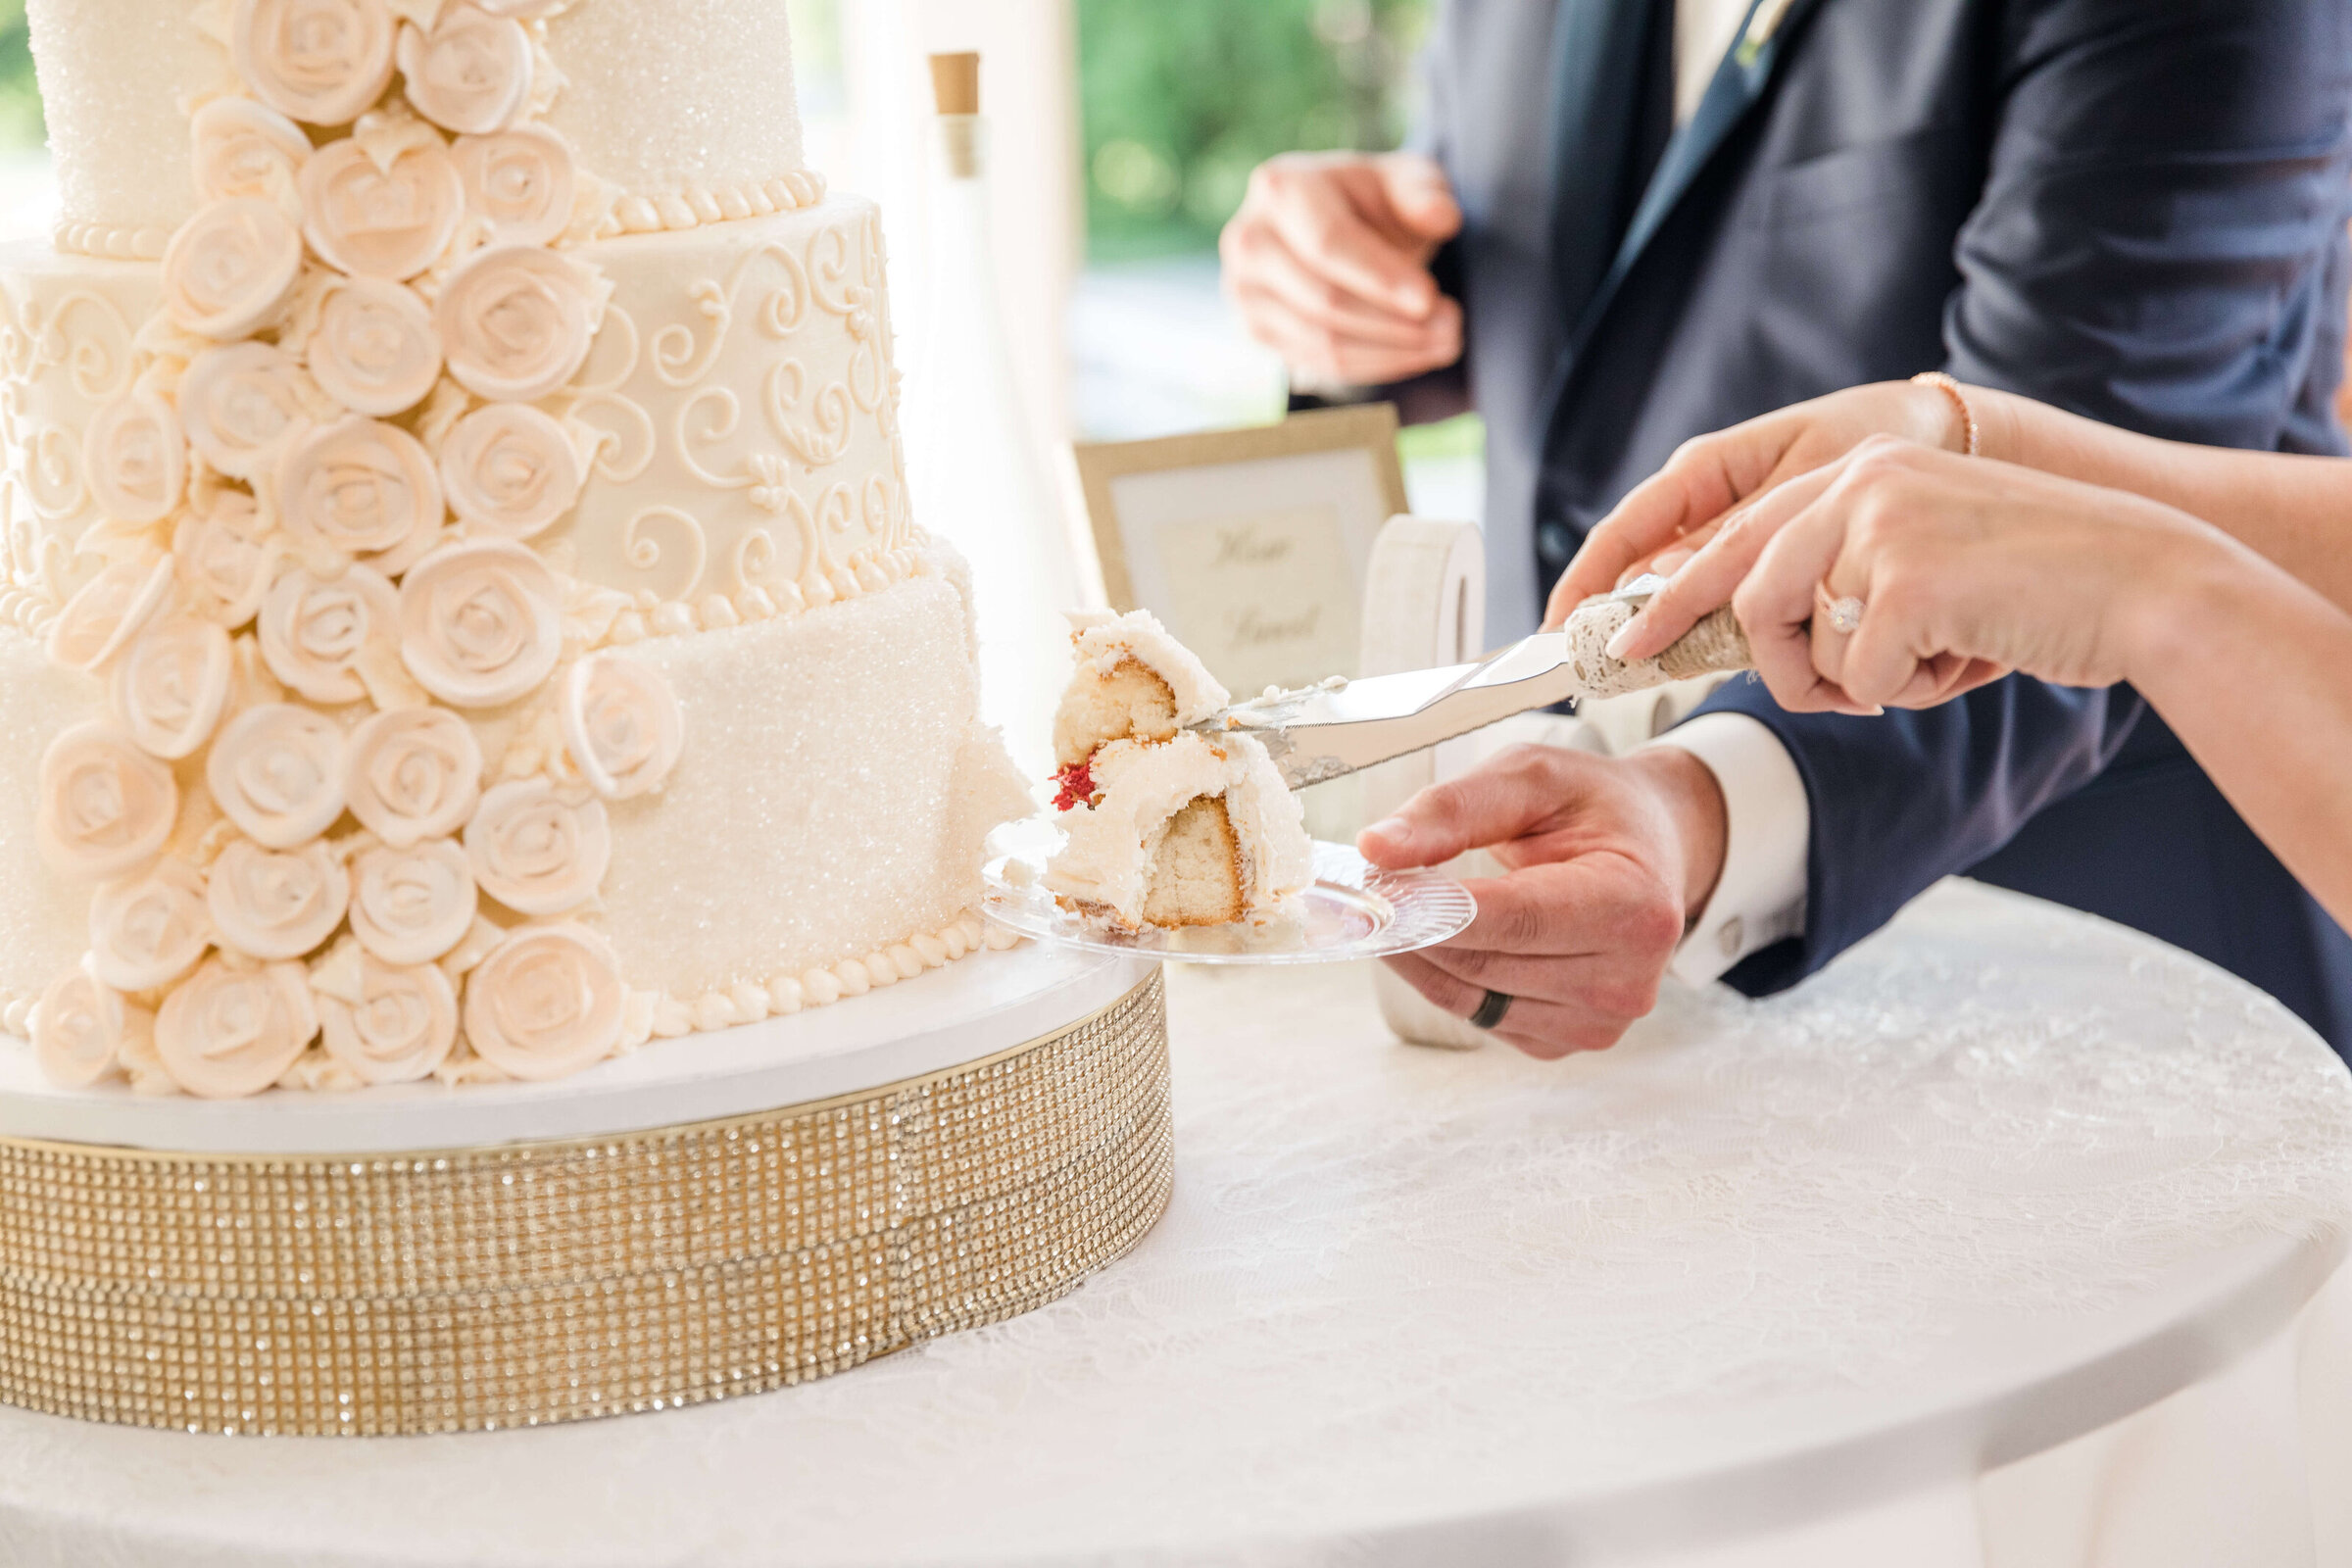 An up close photo of a bride and groom cutting their cake. The cake is light pink and the bride has the cake cut while the groom holds out a plate.